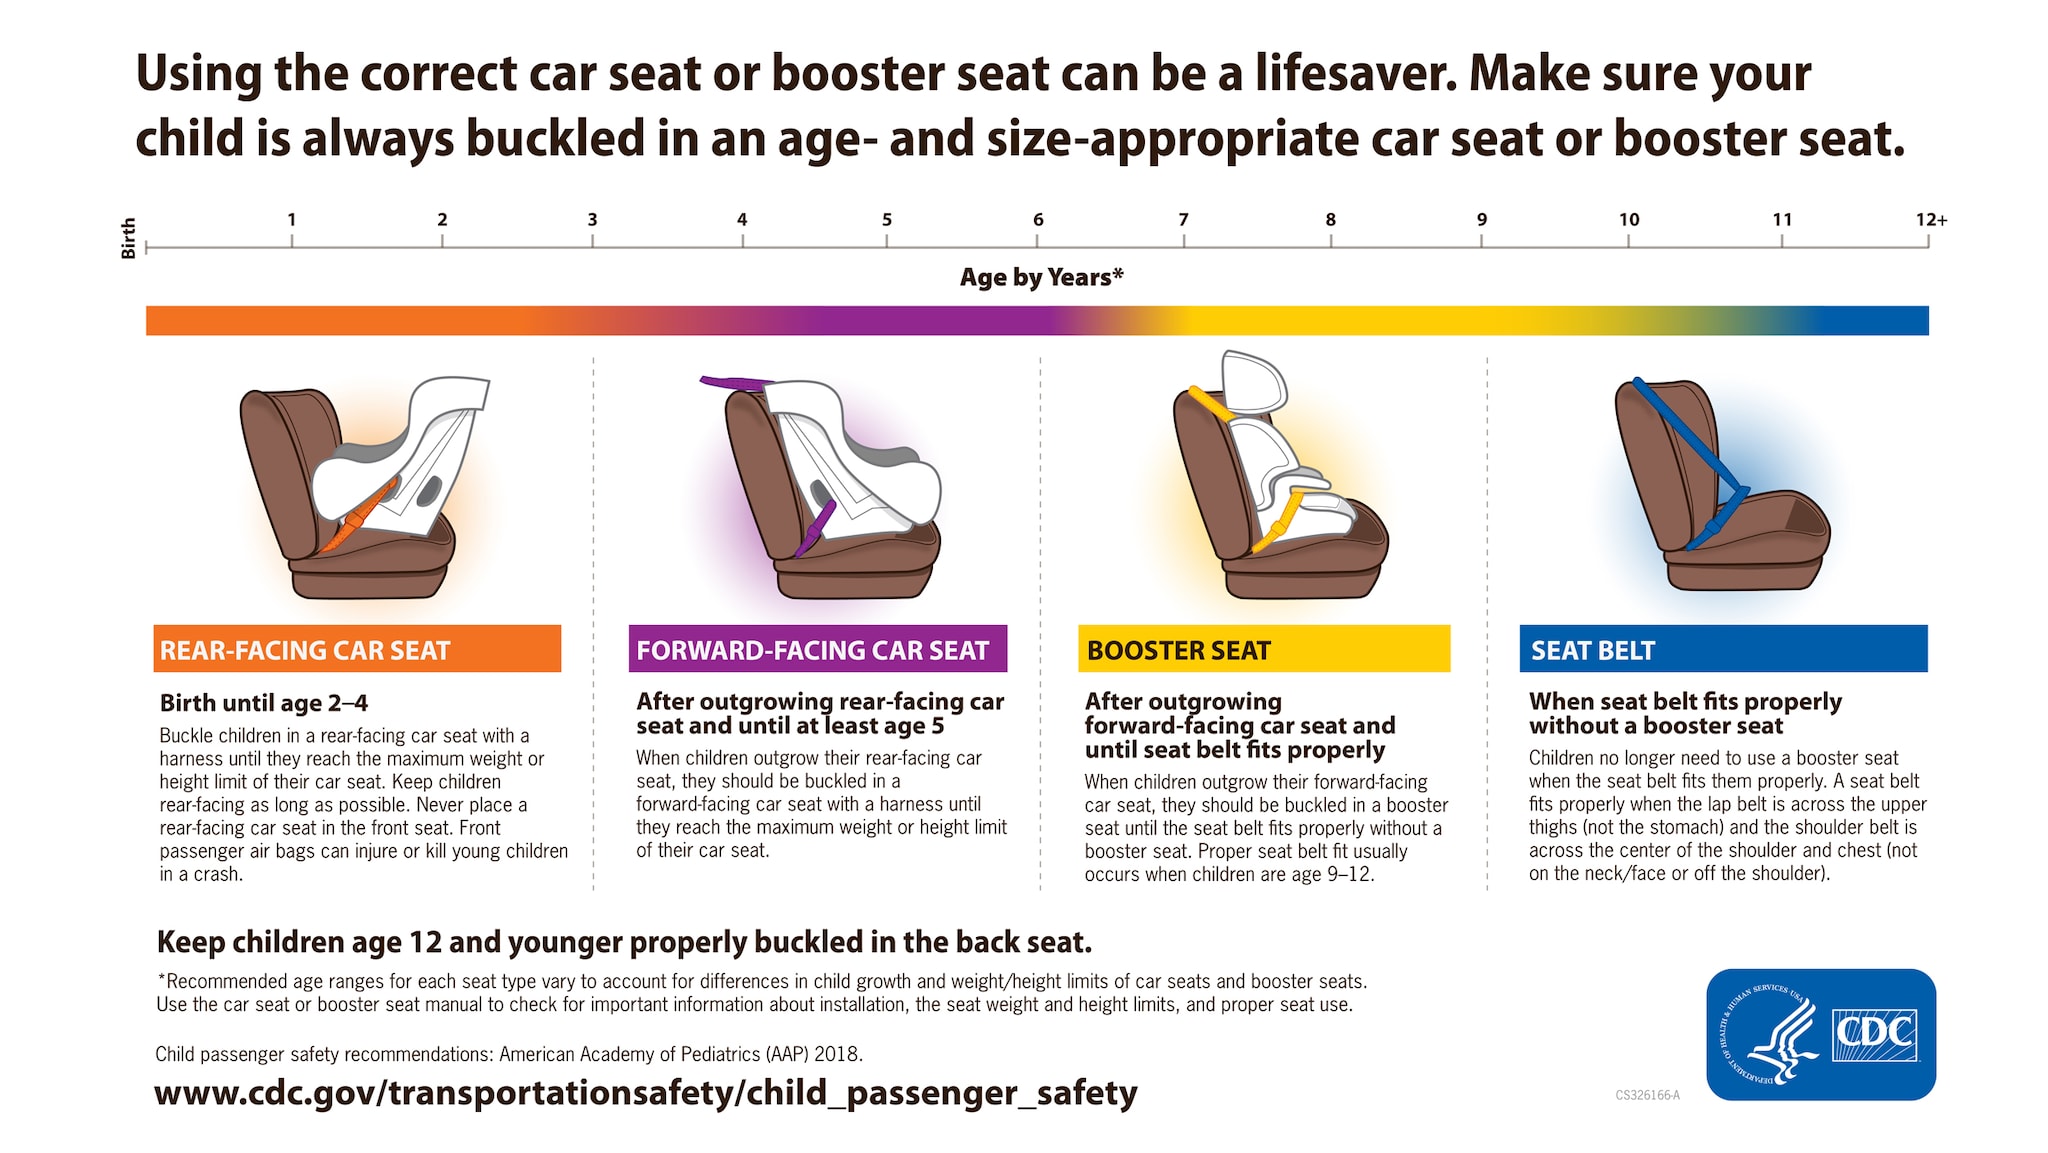 Image showing appropriate car seats and boosters for children at different ages